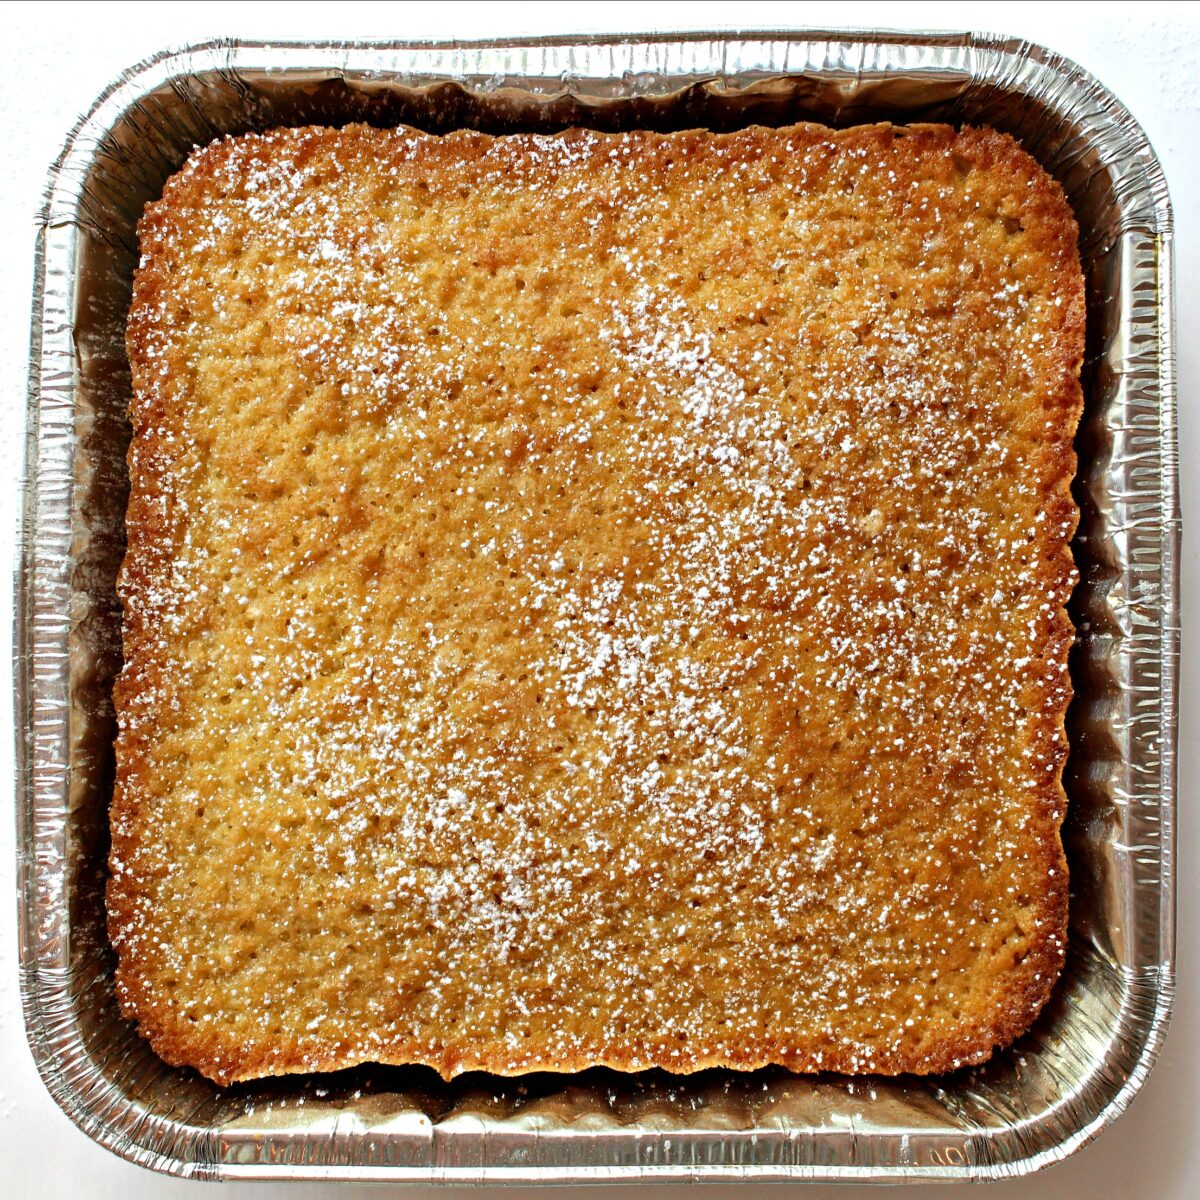 Coconut Milk Snack Cake in a foil pan with powdered sugar sprinkled on top.